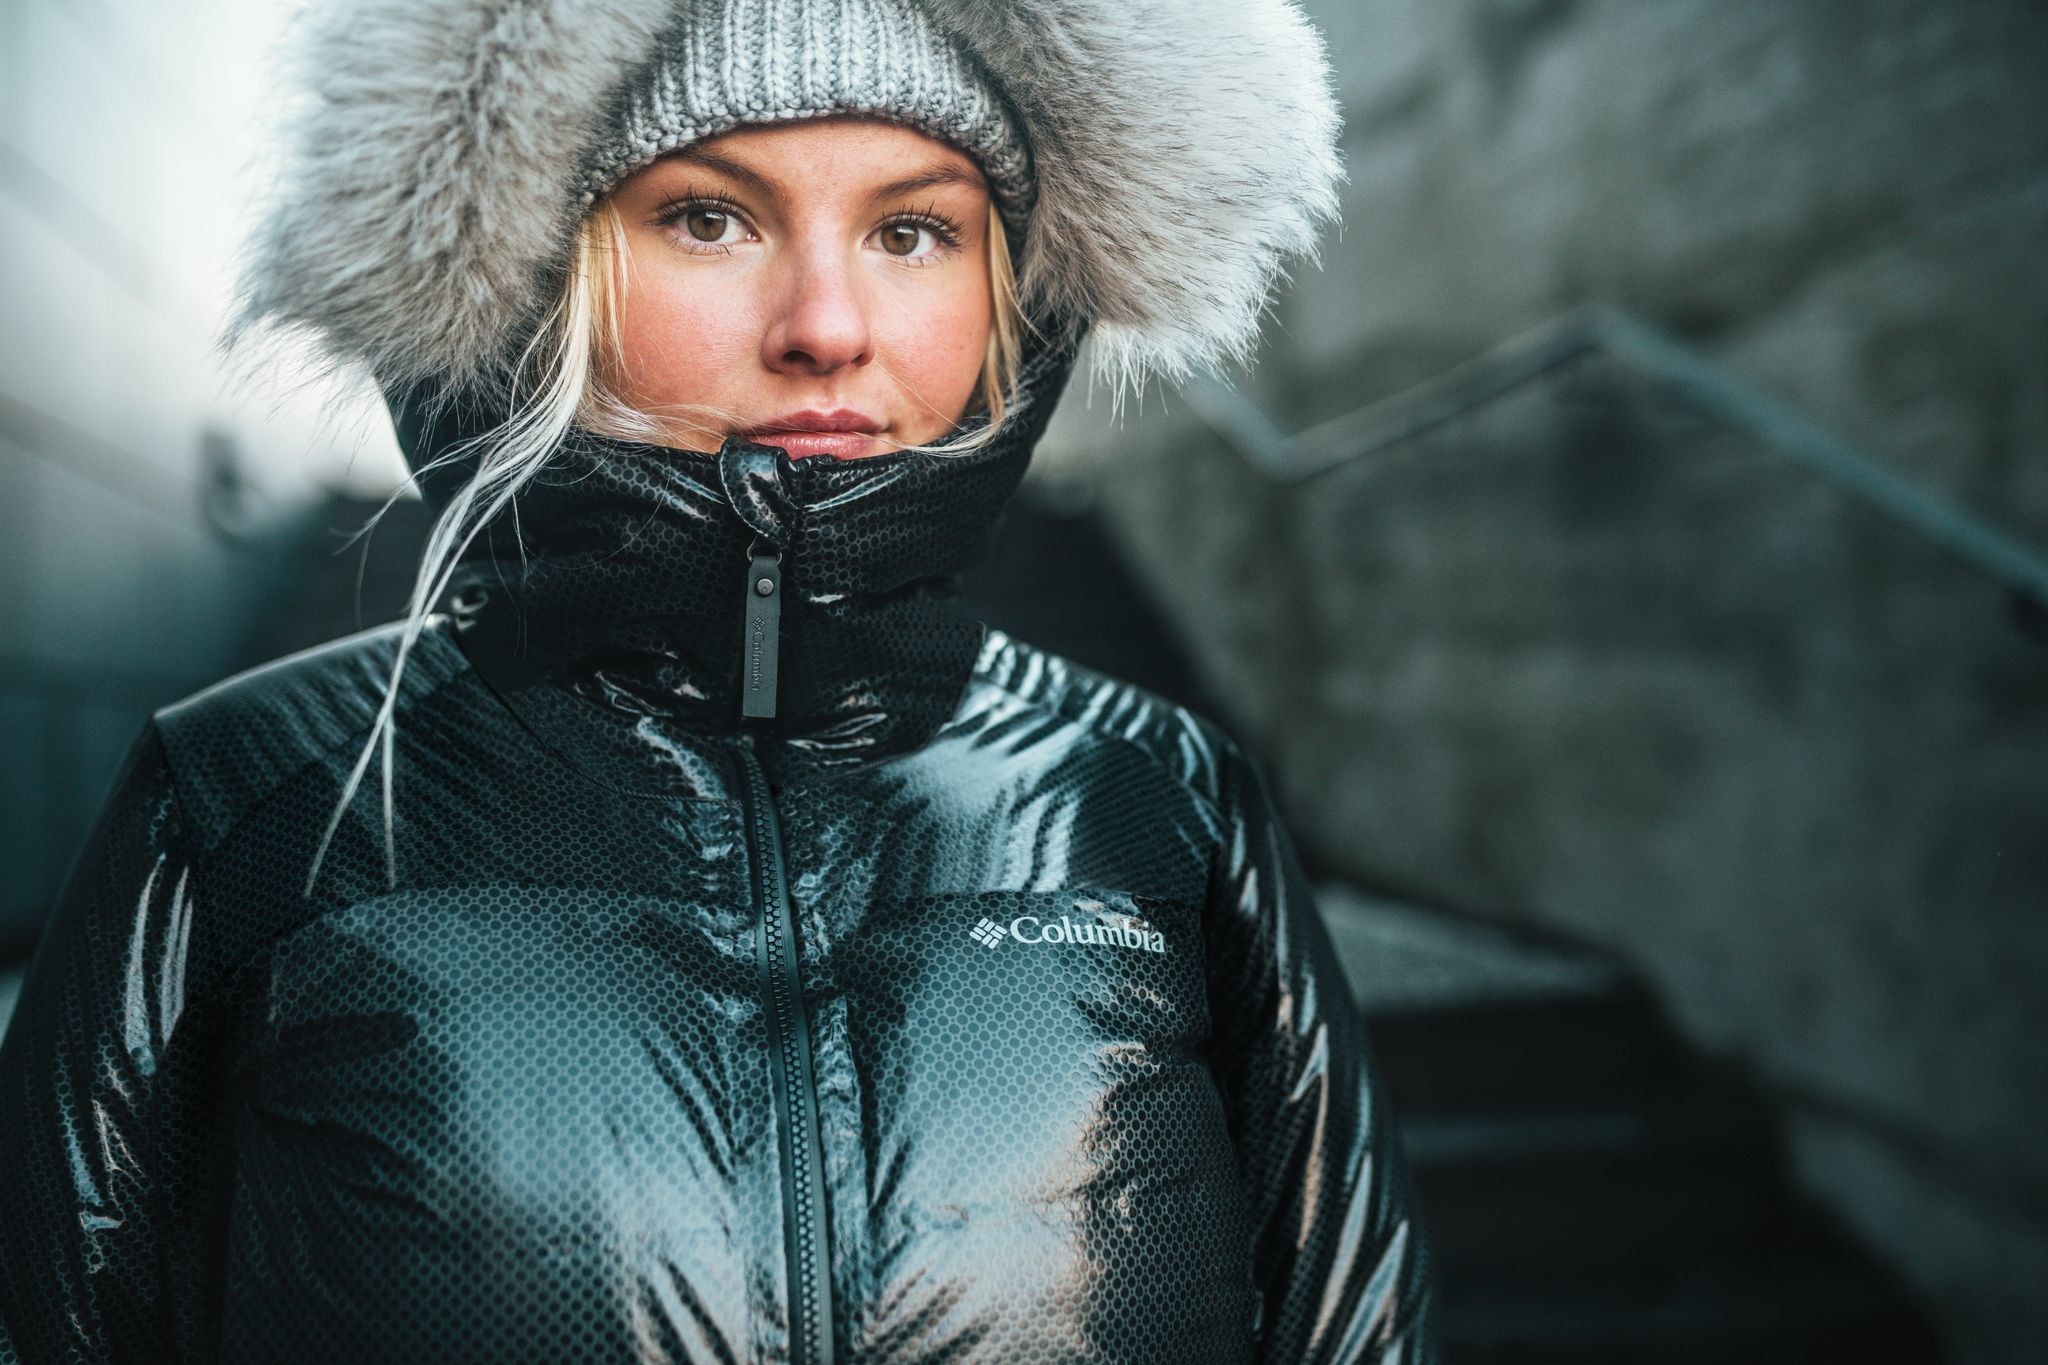 Columbia Sportswear Launches Omni Heat Black Dot An Industry First Warming Technology